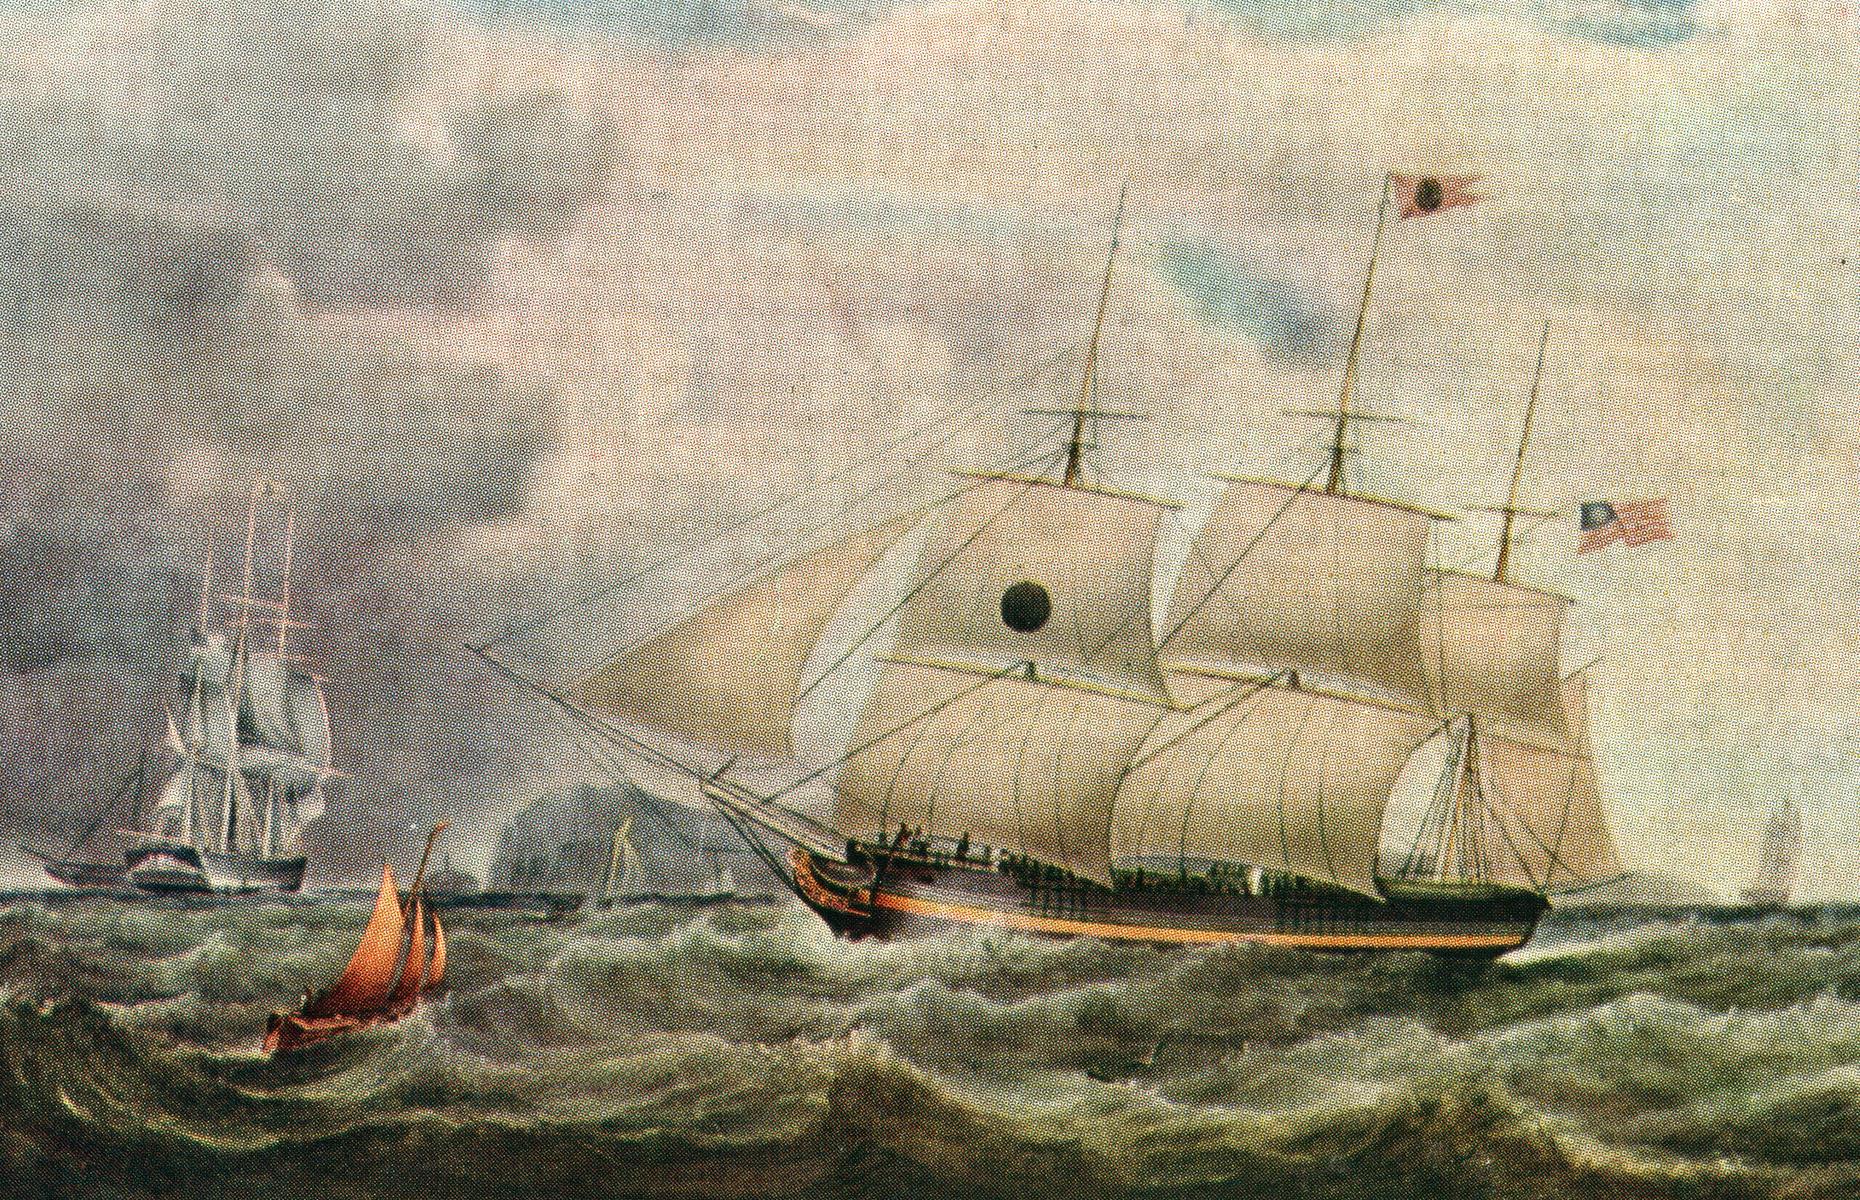 Before passengers began taking to the high seas, now-famous cruise lines principally operated as mail-shipping services. P&O, then the Peninsular Steam Navigation Company, won a contract to deliver mail to the Iberian Peninsula in 1837, a milestone event that would pave the way for commercial travel by ocean. The Black Ball Line, whose ships carried both passengers and mail, also became the first line to schedule a regular trans-Atlantic service. A Black Ball ship is pictured here in 1833.